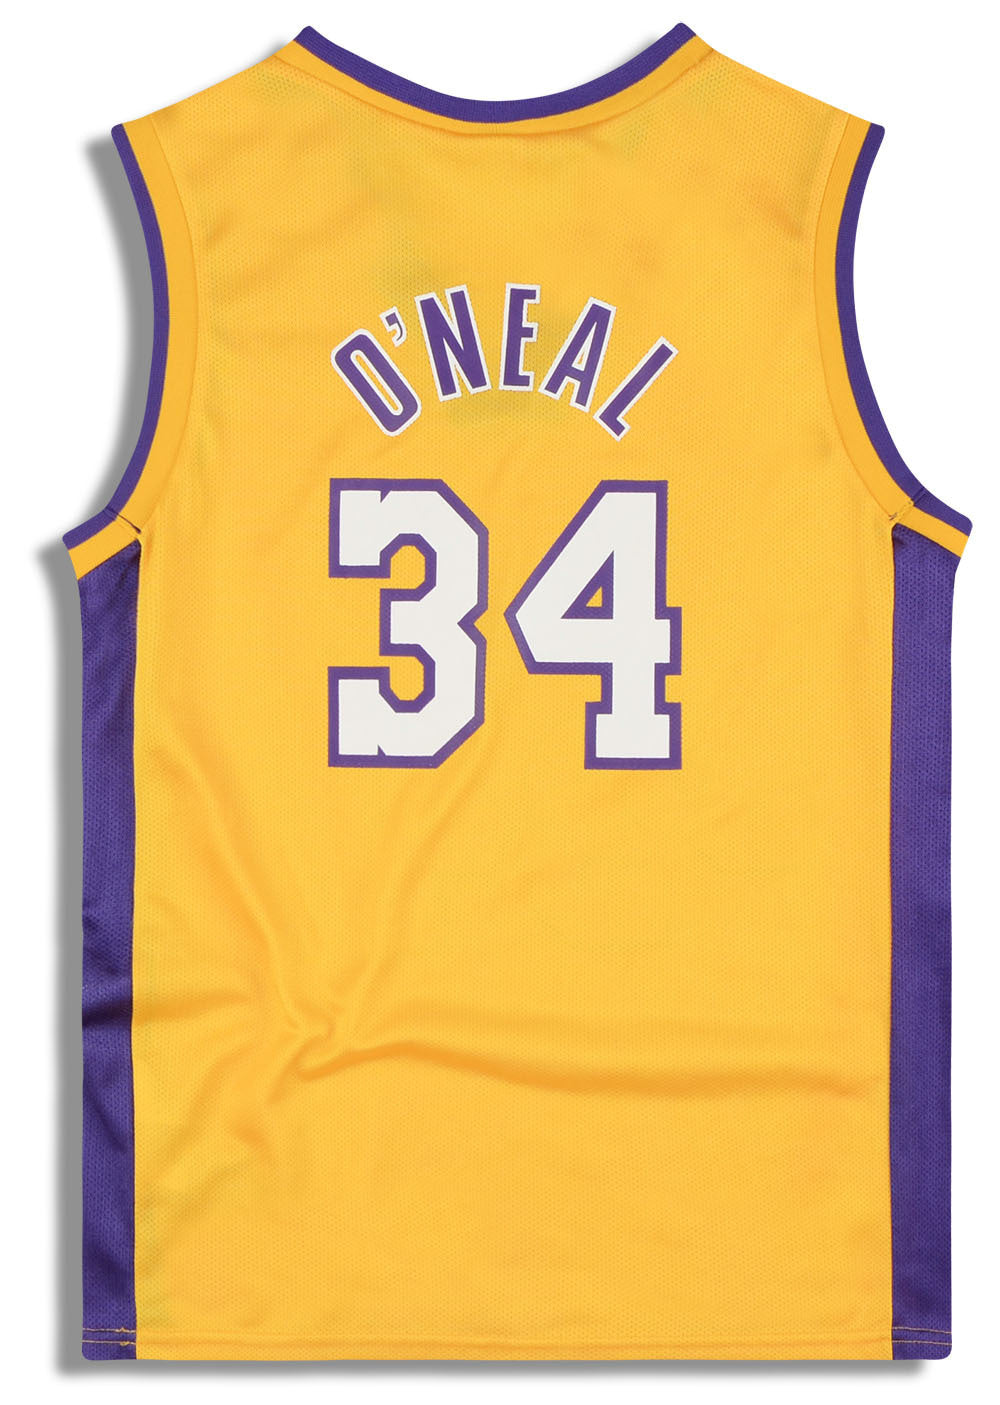 1999-02 LA LAKERS O'NEAL #34 CHAMPION JERSEY (HOME) Y